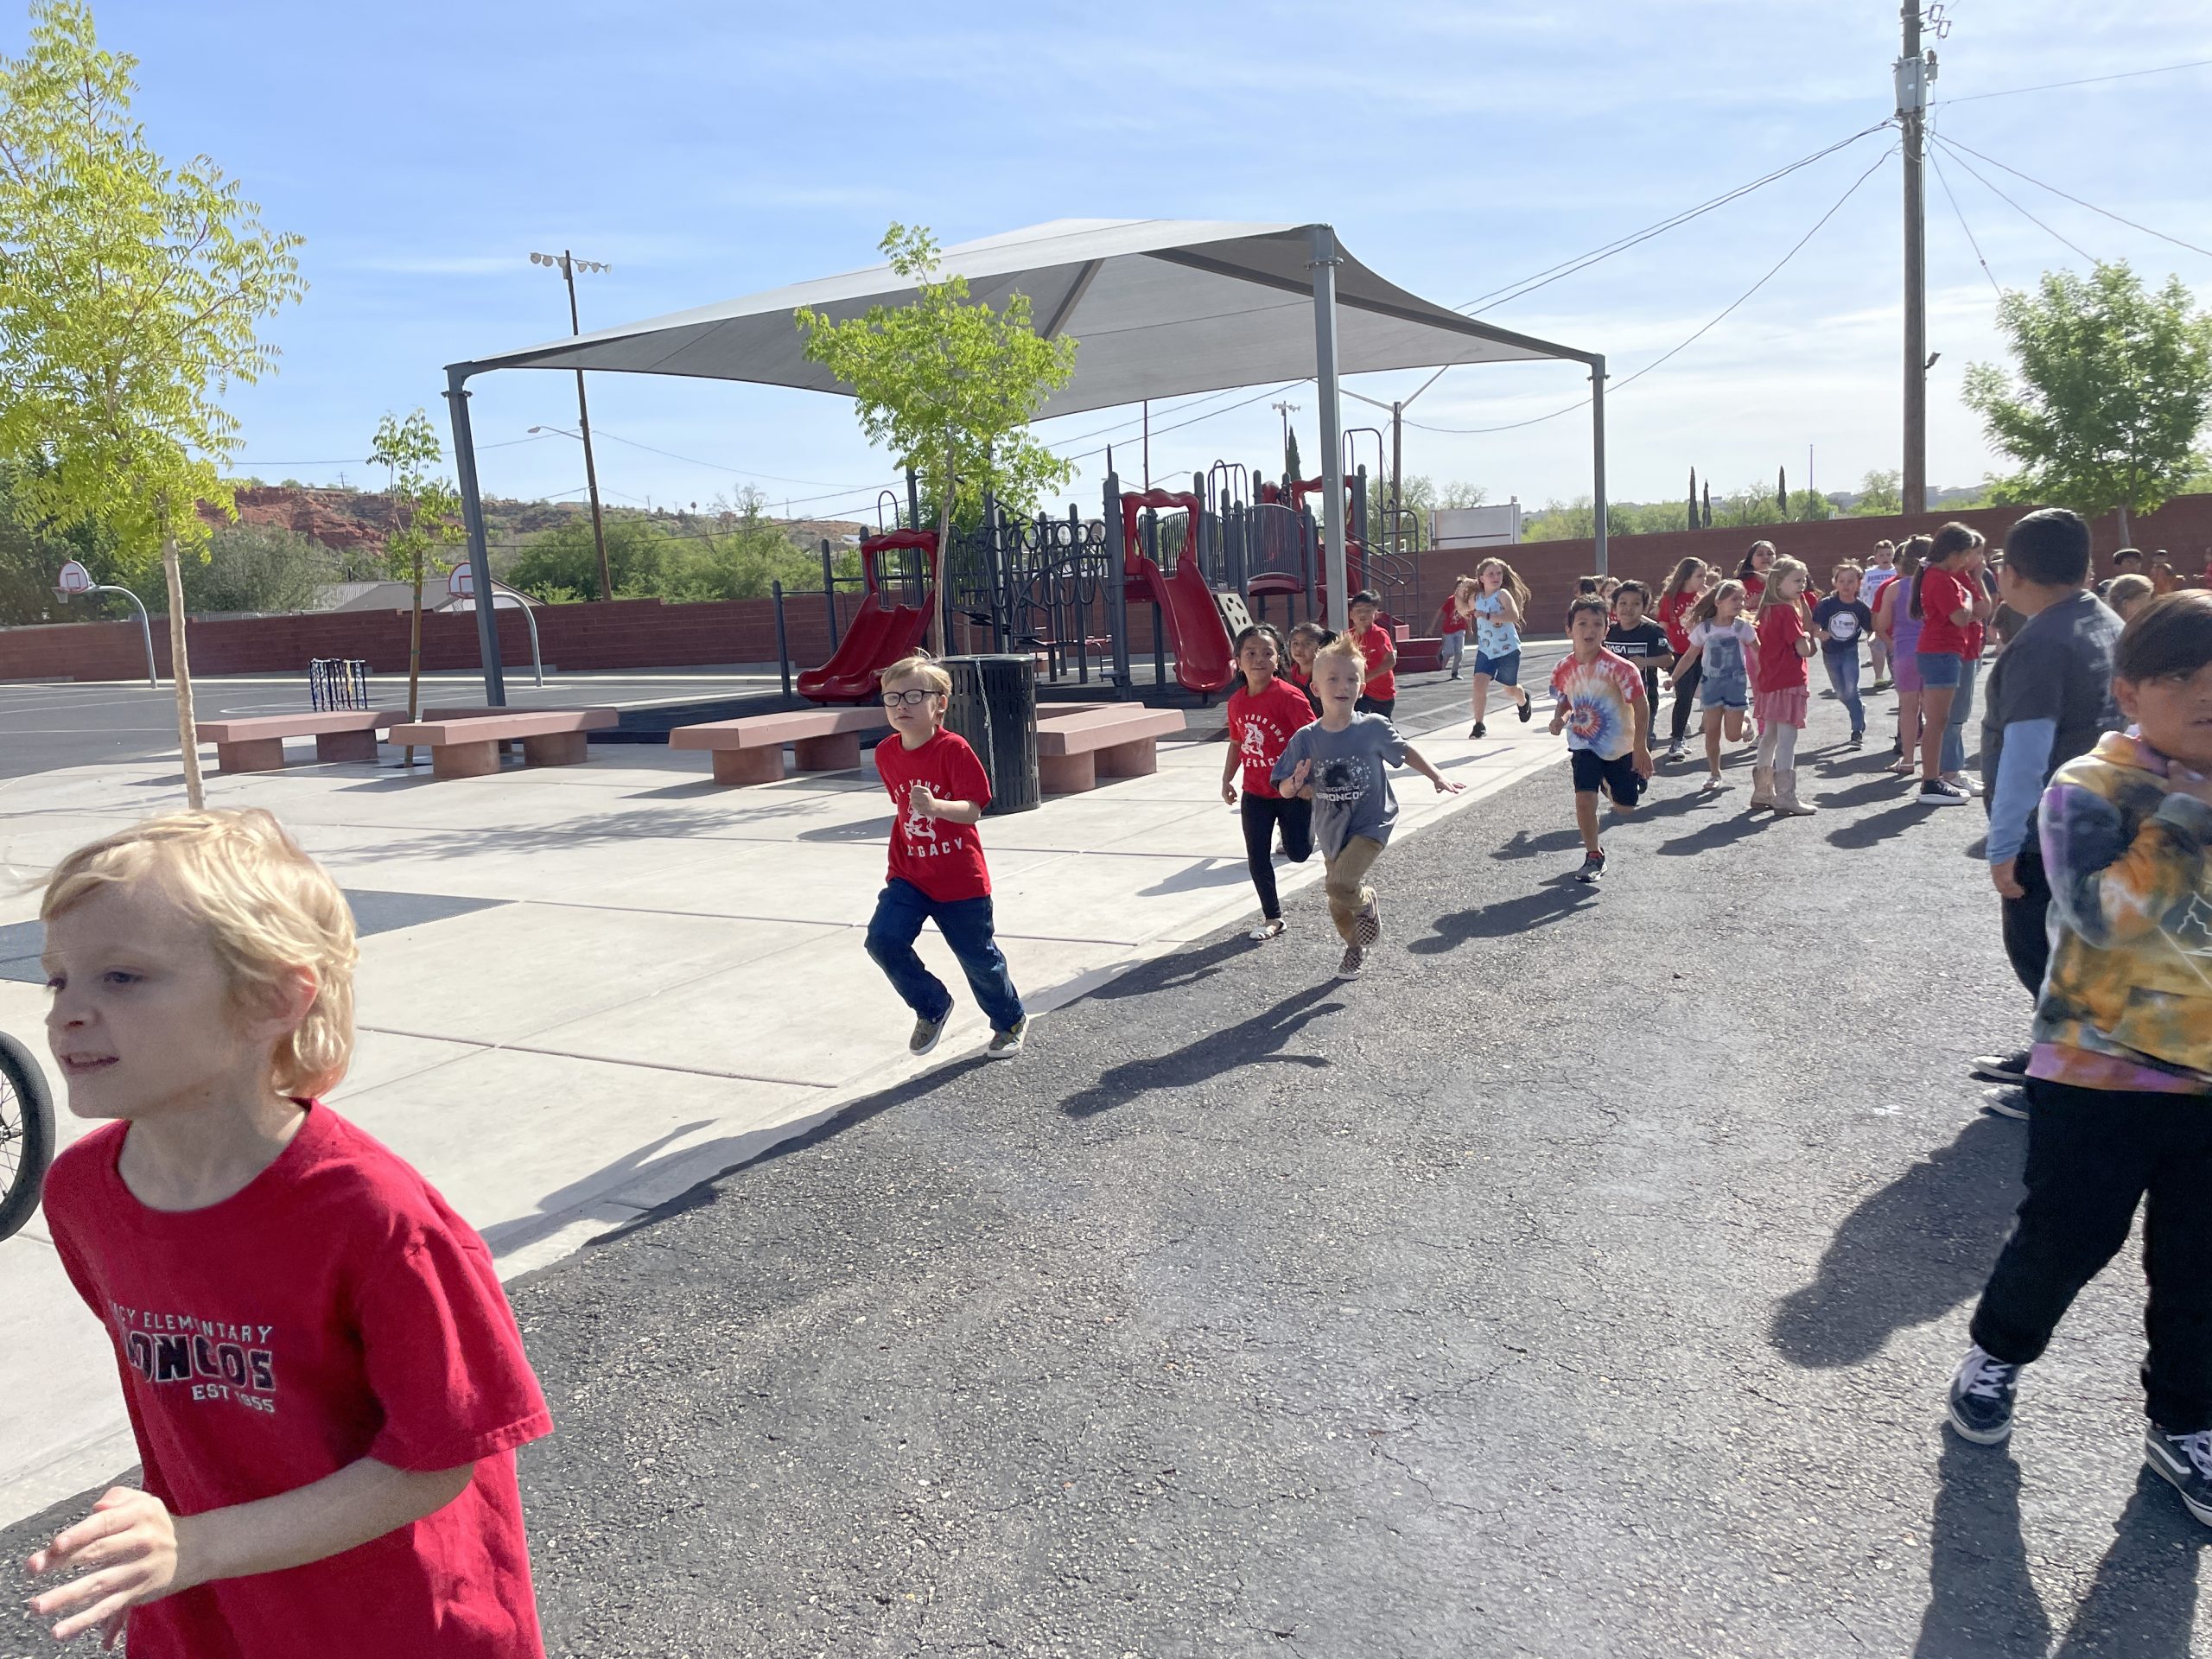 Students run laps to get ready for the IronKids run.